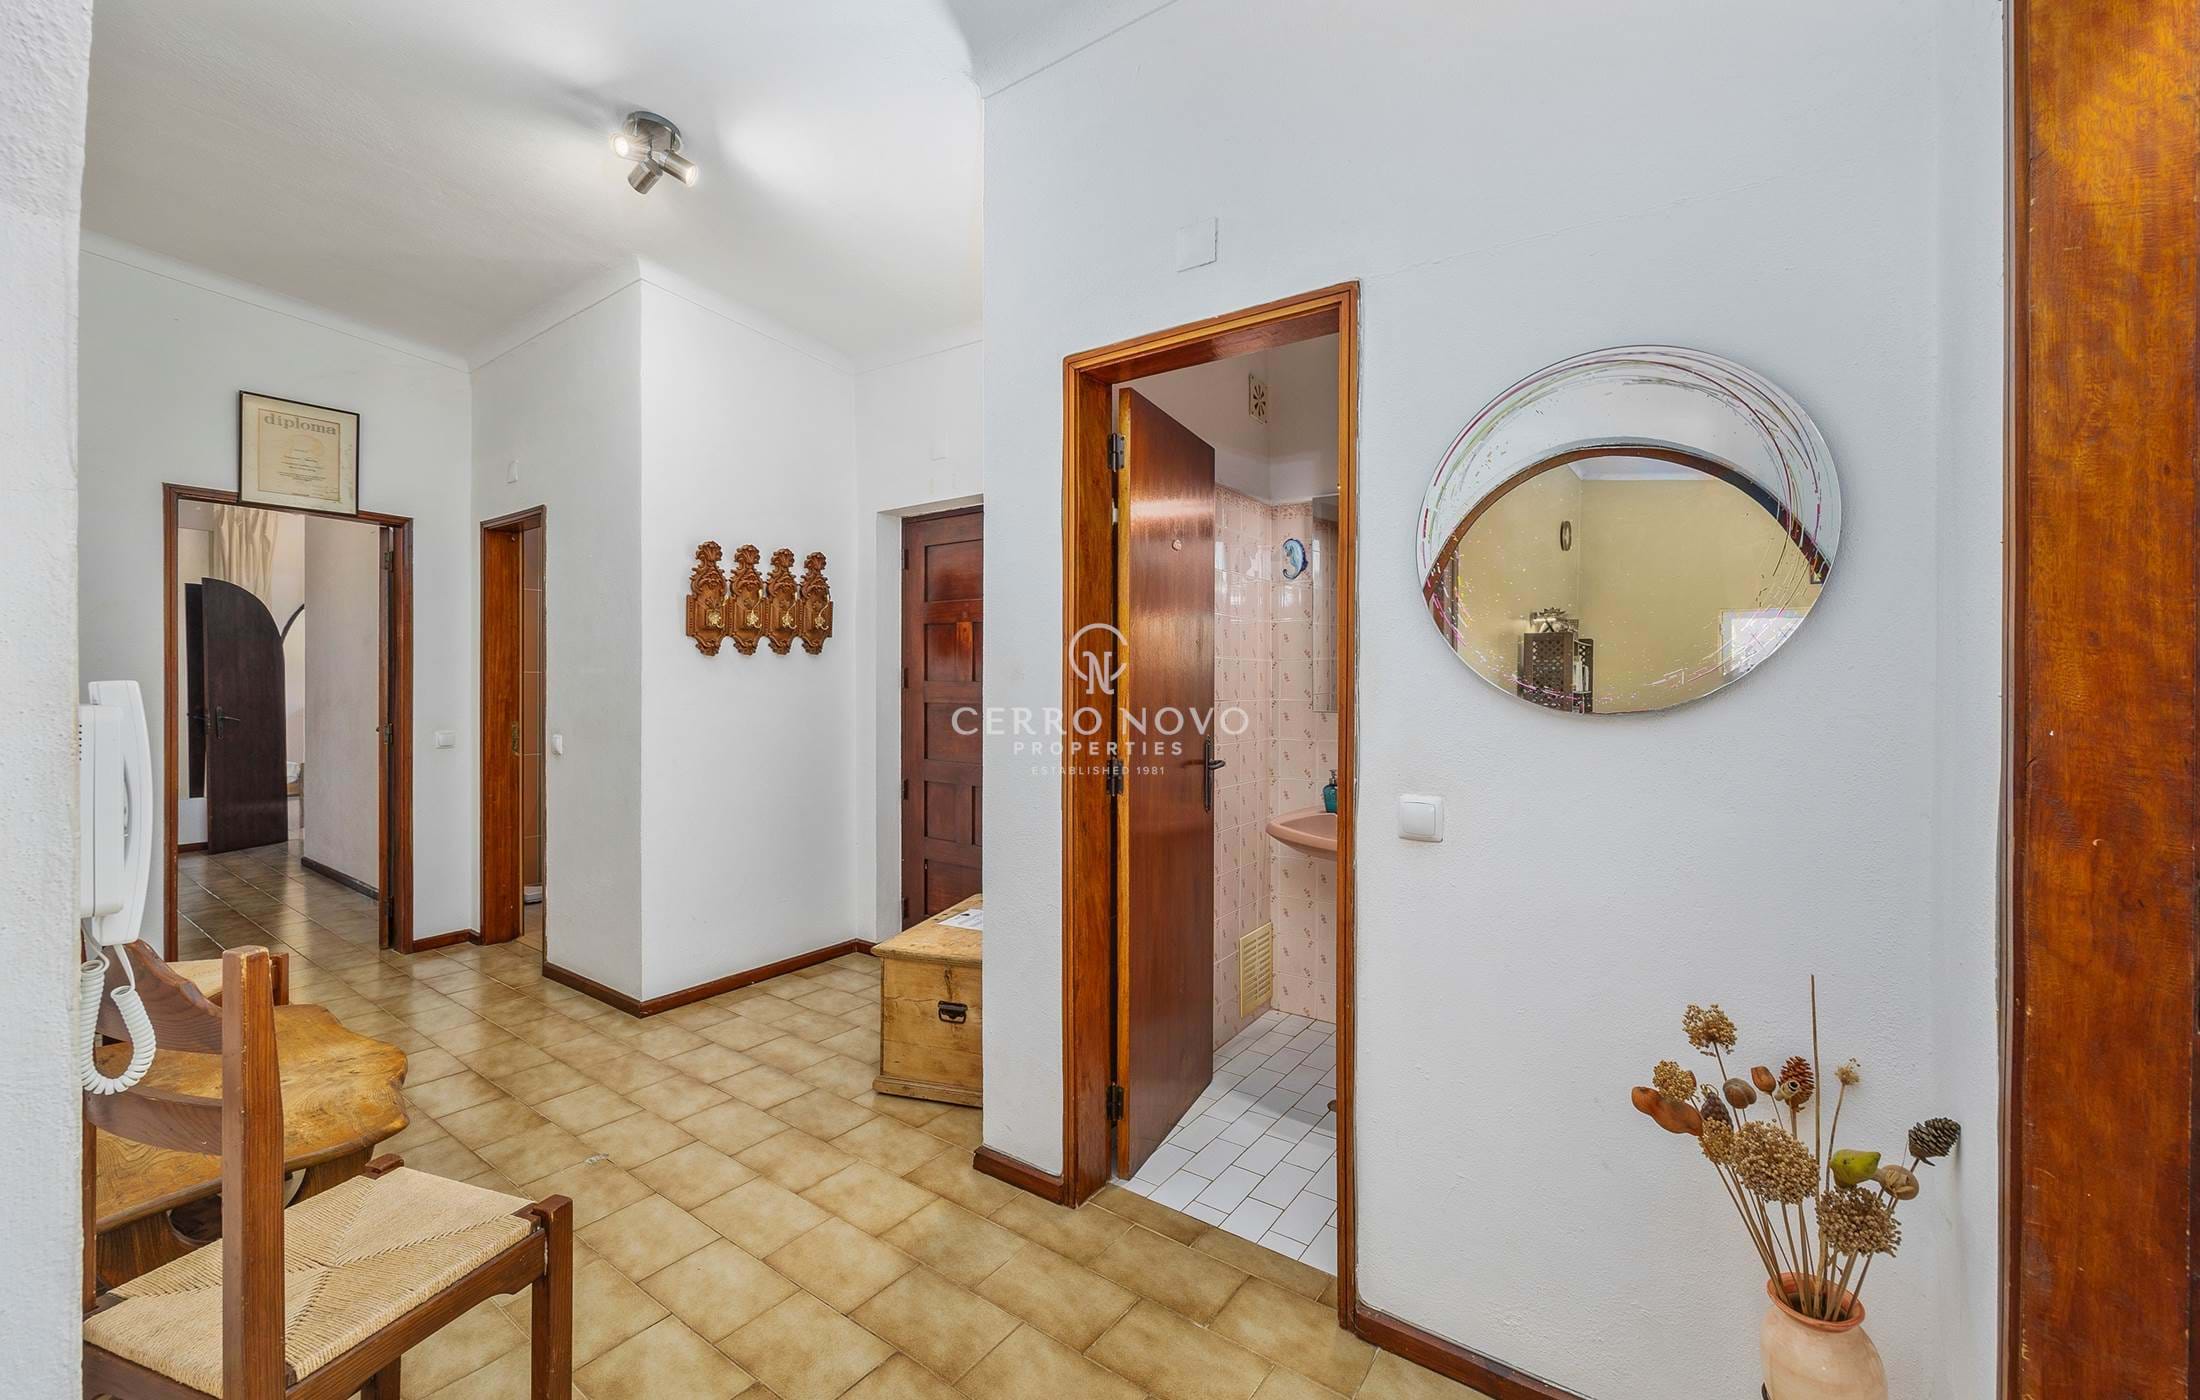 Large single storey traditional villa in a convenient and peaceful location